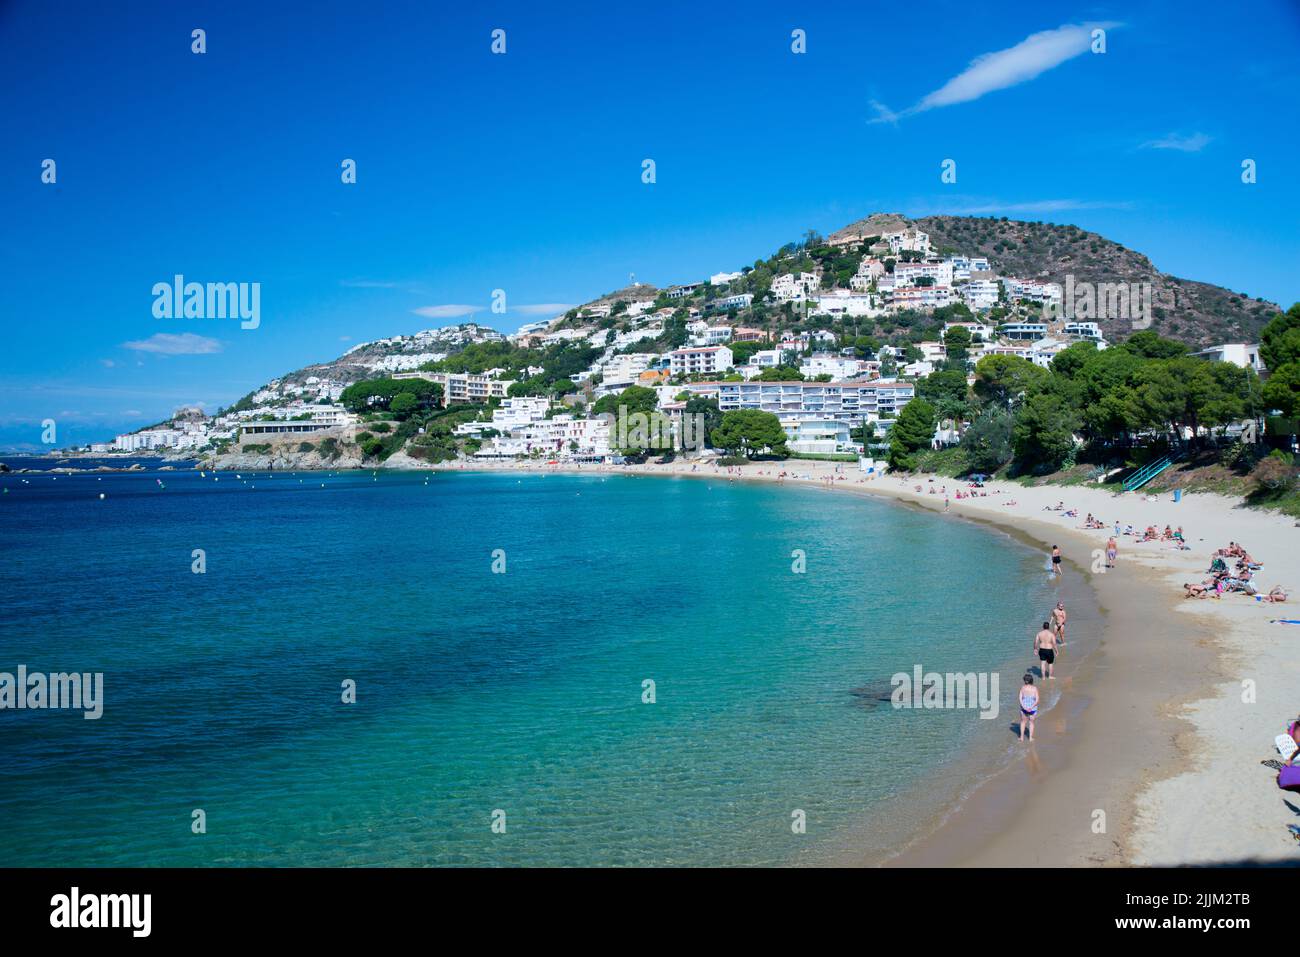 A view of a sand beach and the sea with the cityscape of Roses in the background Stock Photo